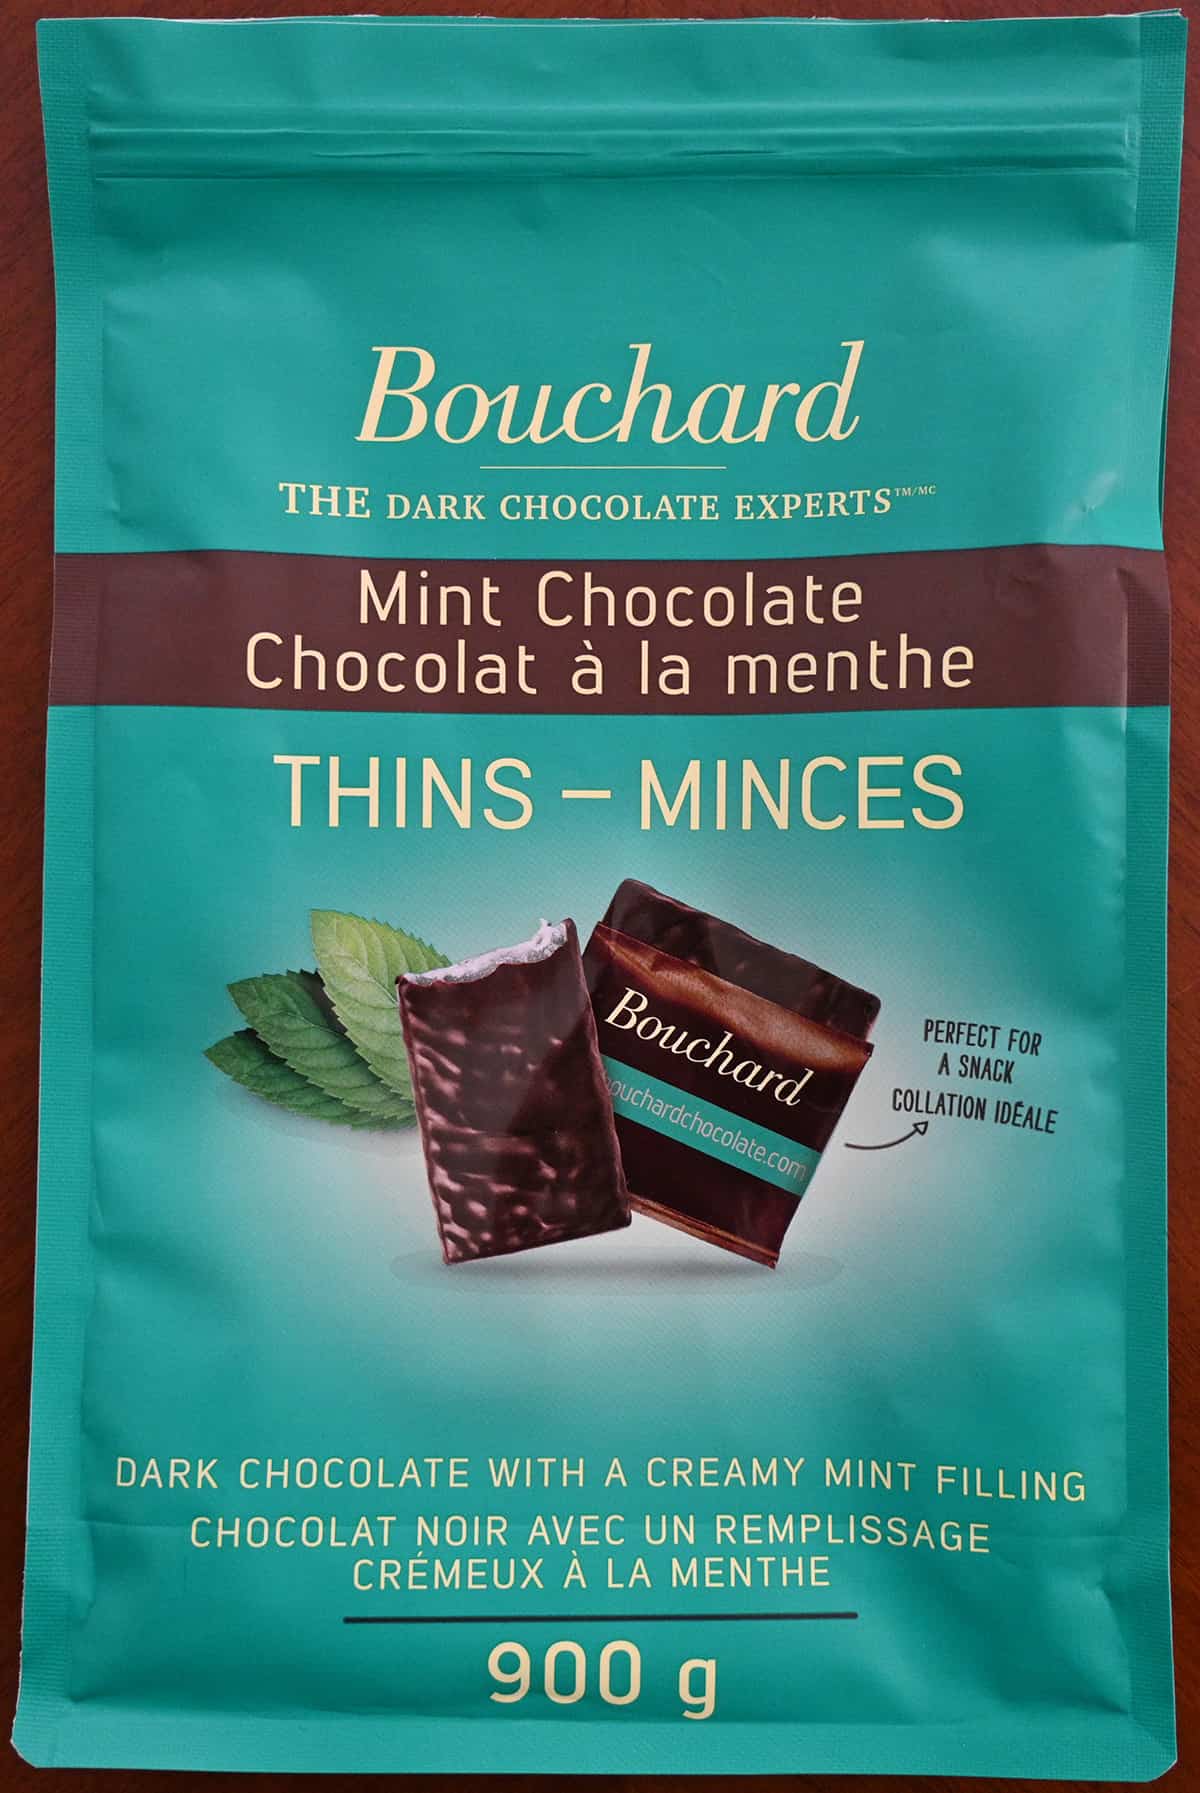 Closeup image of the front of the bag of mint chocolate thins showing weight of bag.